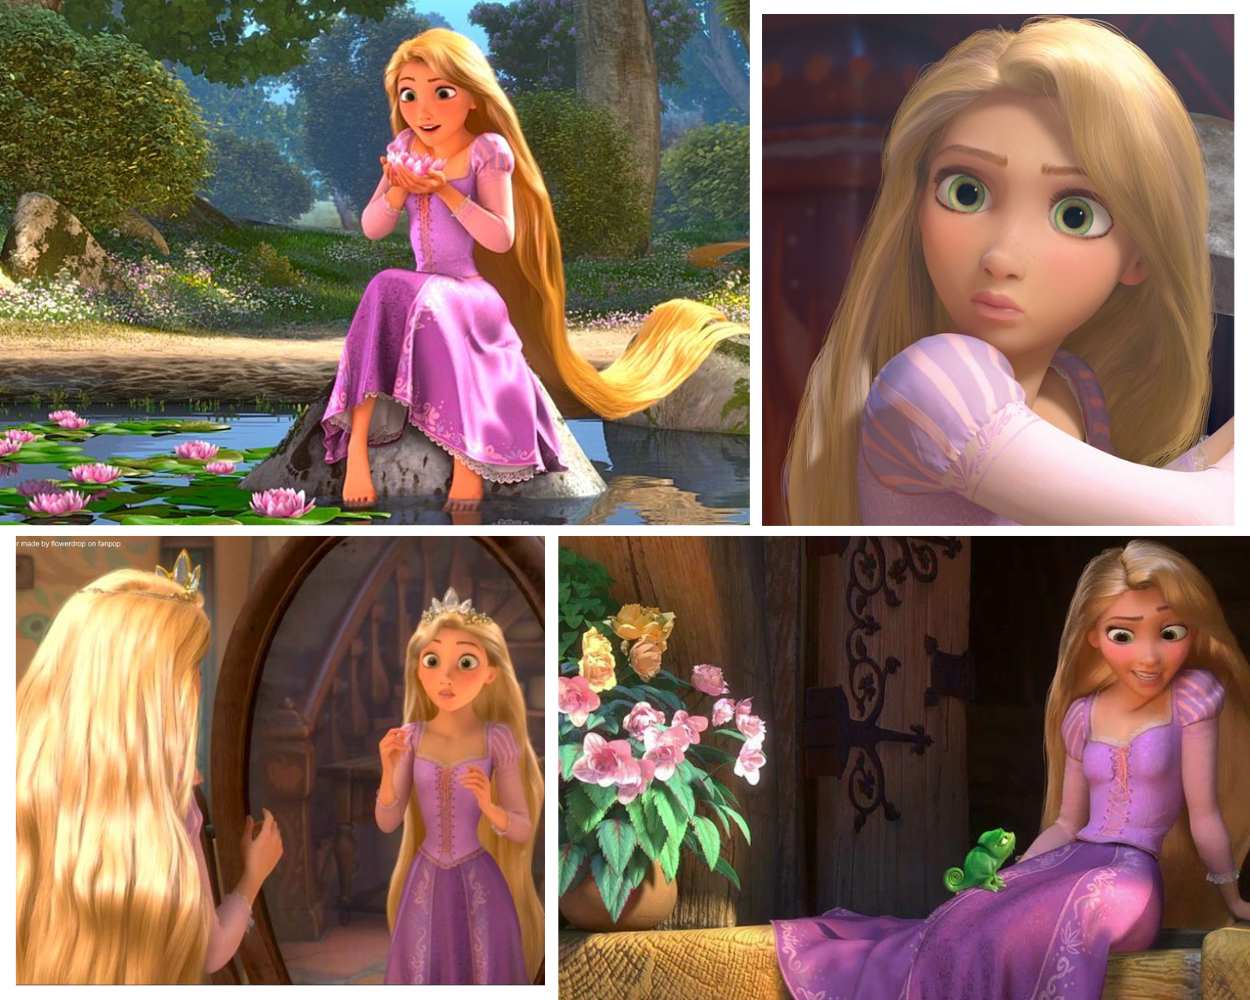 Rapunzel From Tangled Has Long Blonde Hair